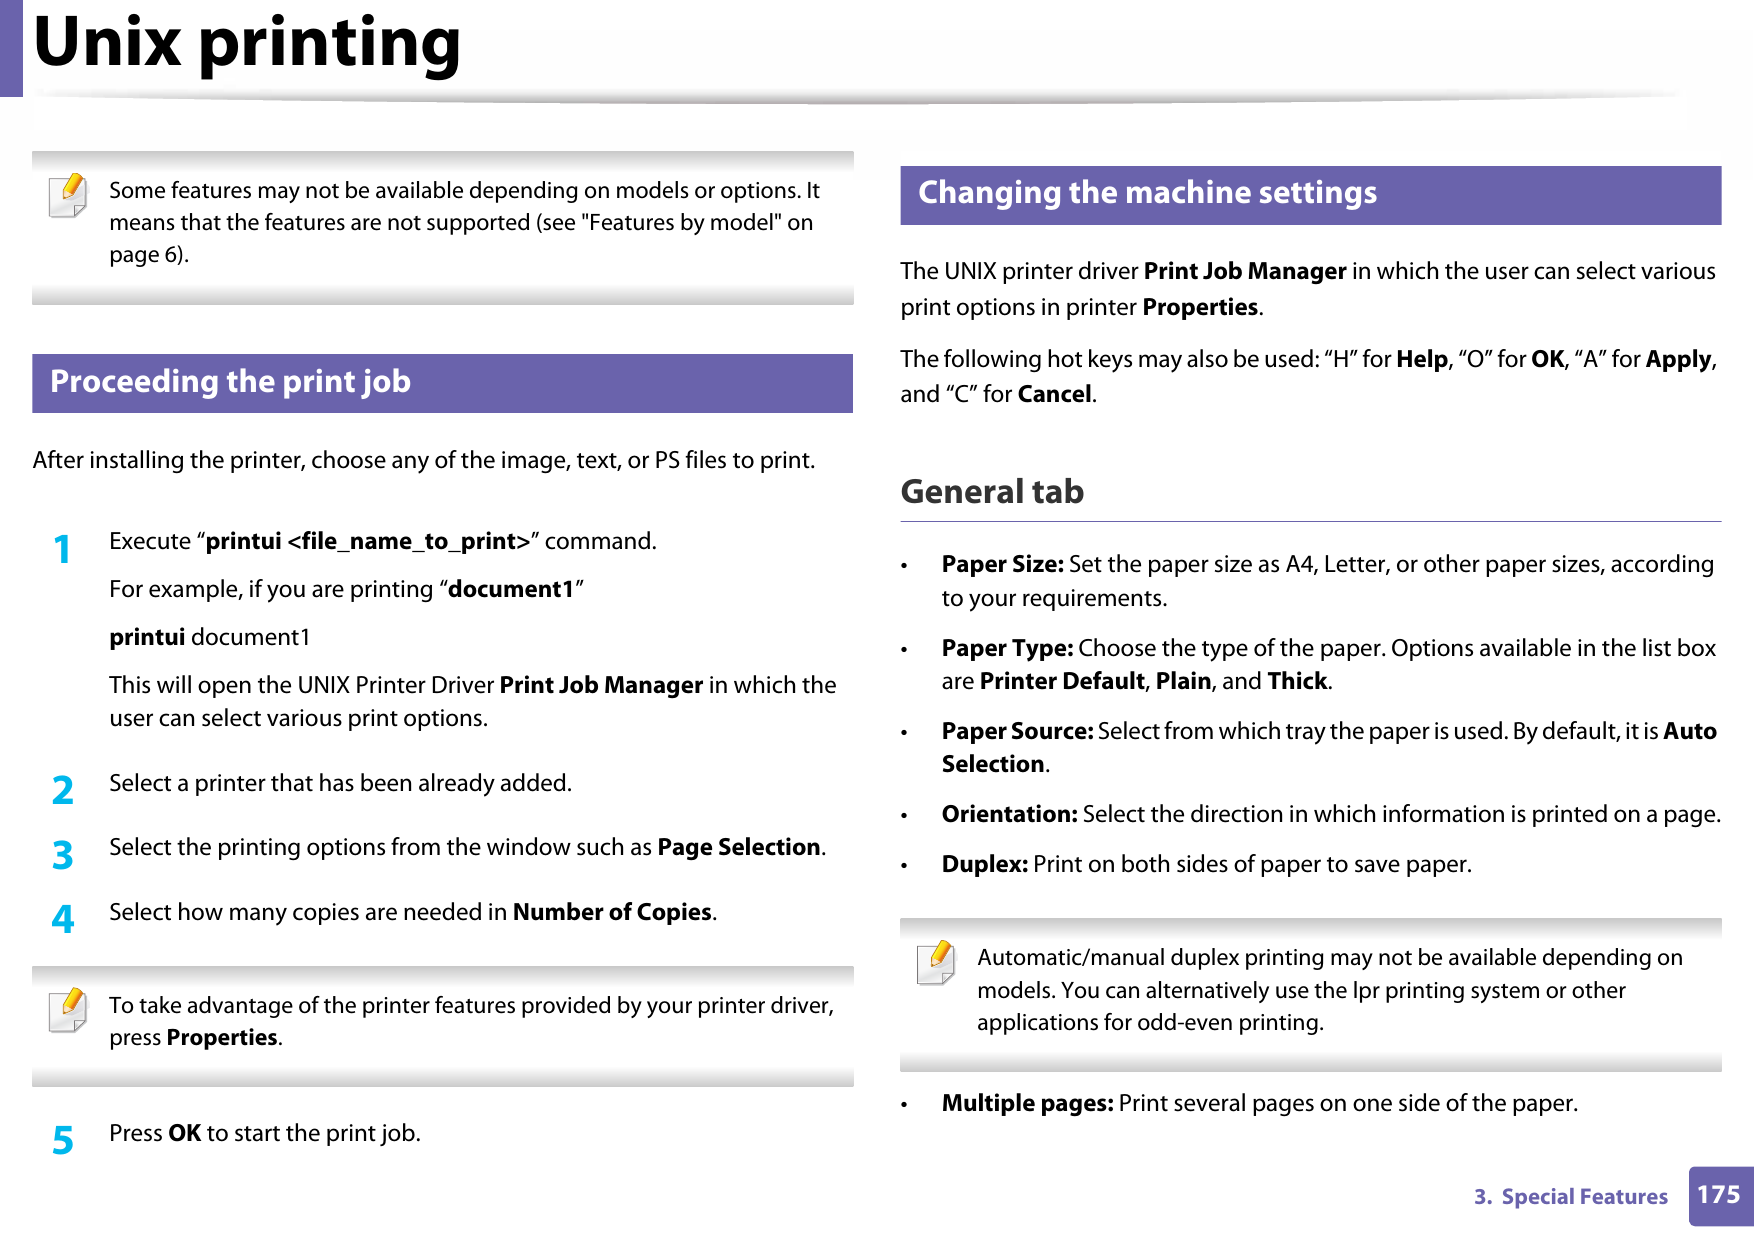 1753.  Special FeaturesUnix printing  Some features may not be available depending on models or options. It means that the features are not supported (see &quot;Features by model&quot; on page 6). 14 Proceeding the print jobAfter installing the printer, choose any of the image, text, or PS files to print.1Execute “printui &lt;file_name_to_print&gt;” command.For example, if you are printing “document1”printui document1This will open the UNIX Printer Driver Print Job Manager in which the user can select various print options.2  Select a printer that has been already added.3  Select the printing options from the window such as Page Selection.4  Select how many copies are needed in Number of Copies. To take advantage of the printer features provided by your printer driver, press Properties. 5  Press OK to start the print job.15 Changing the machine settingsThe UNIX printer driver Print Job Manager in which the user can select various print options in printer Properties.The following hot keys may also be used: “H” for Help, “O” for OK, “A” for Apply, and “C” for Cancel.General tab•Paper Size: Set the paper size as A4, Letter, or other paper sizes, according to your requirements.•Paper Type: Choose the type of the paper. Options available in the list box are Printer Default, Plain, and Thick.•Paper Source: Select from which tray the paper is used. By default, it is Auto Selection.•Orientation: Select the direction in which information is printed on a page.•Duplex: Print on both sides of paper to save paper. Automatic/manual duplex printing may not be available depending on models. You can alternatively use the lpr printing system or other applications for odd-even printing. •Multiple pages: Print several pages on one side of the paper.